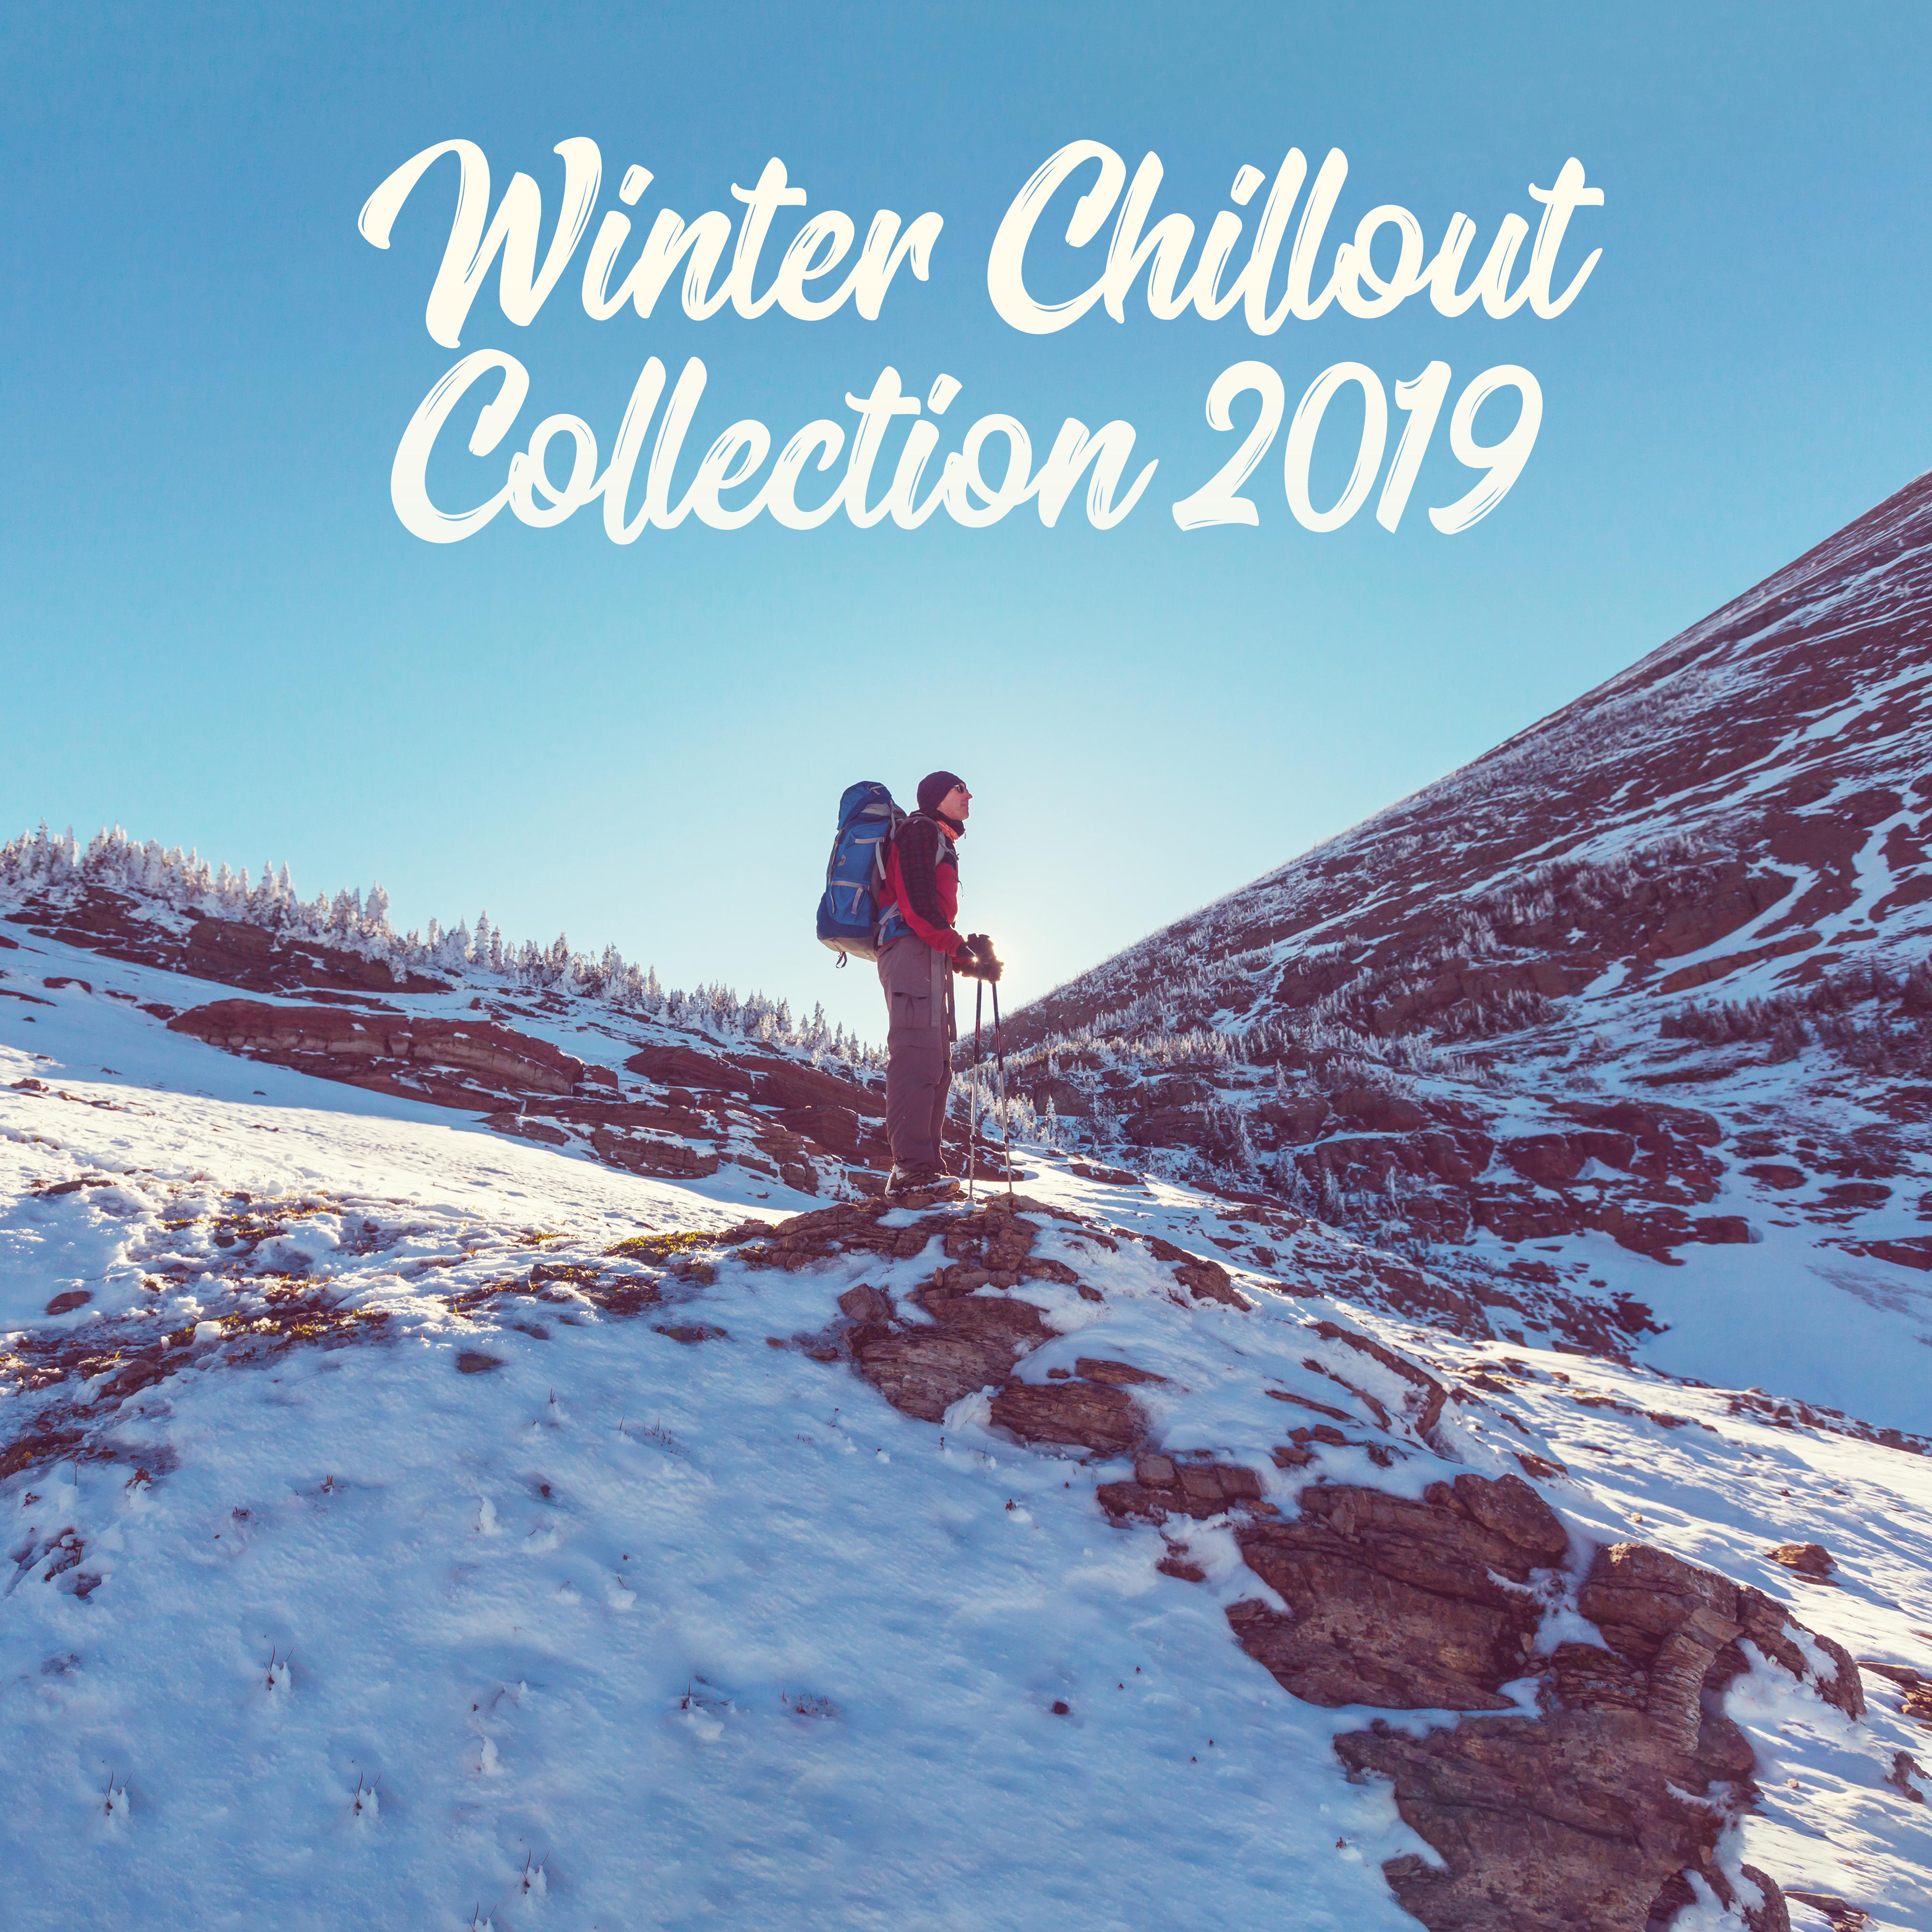 Winter Chillout Collection 2019 - Best Winter Beats of the Turn of 2018/20119